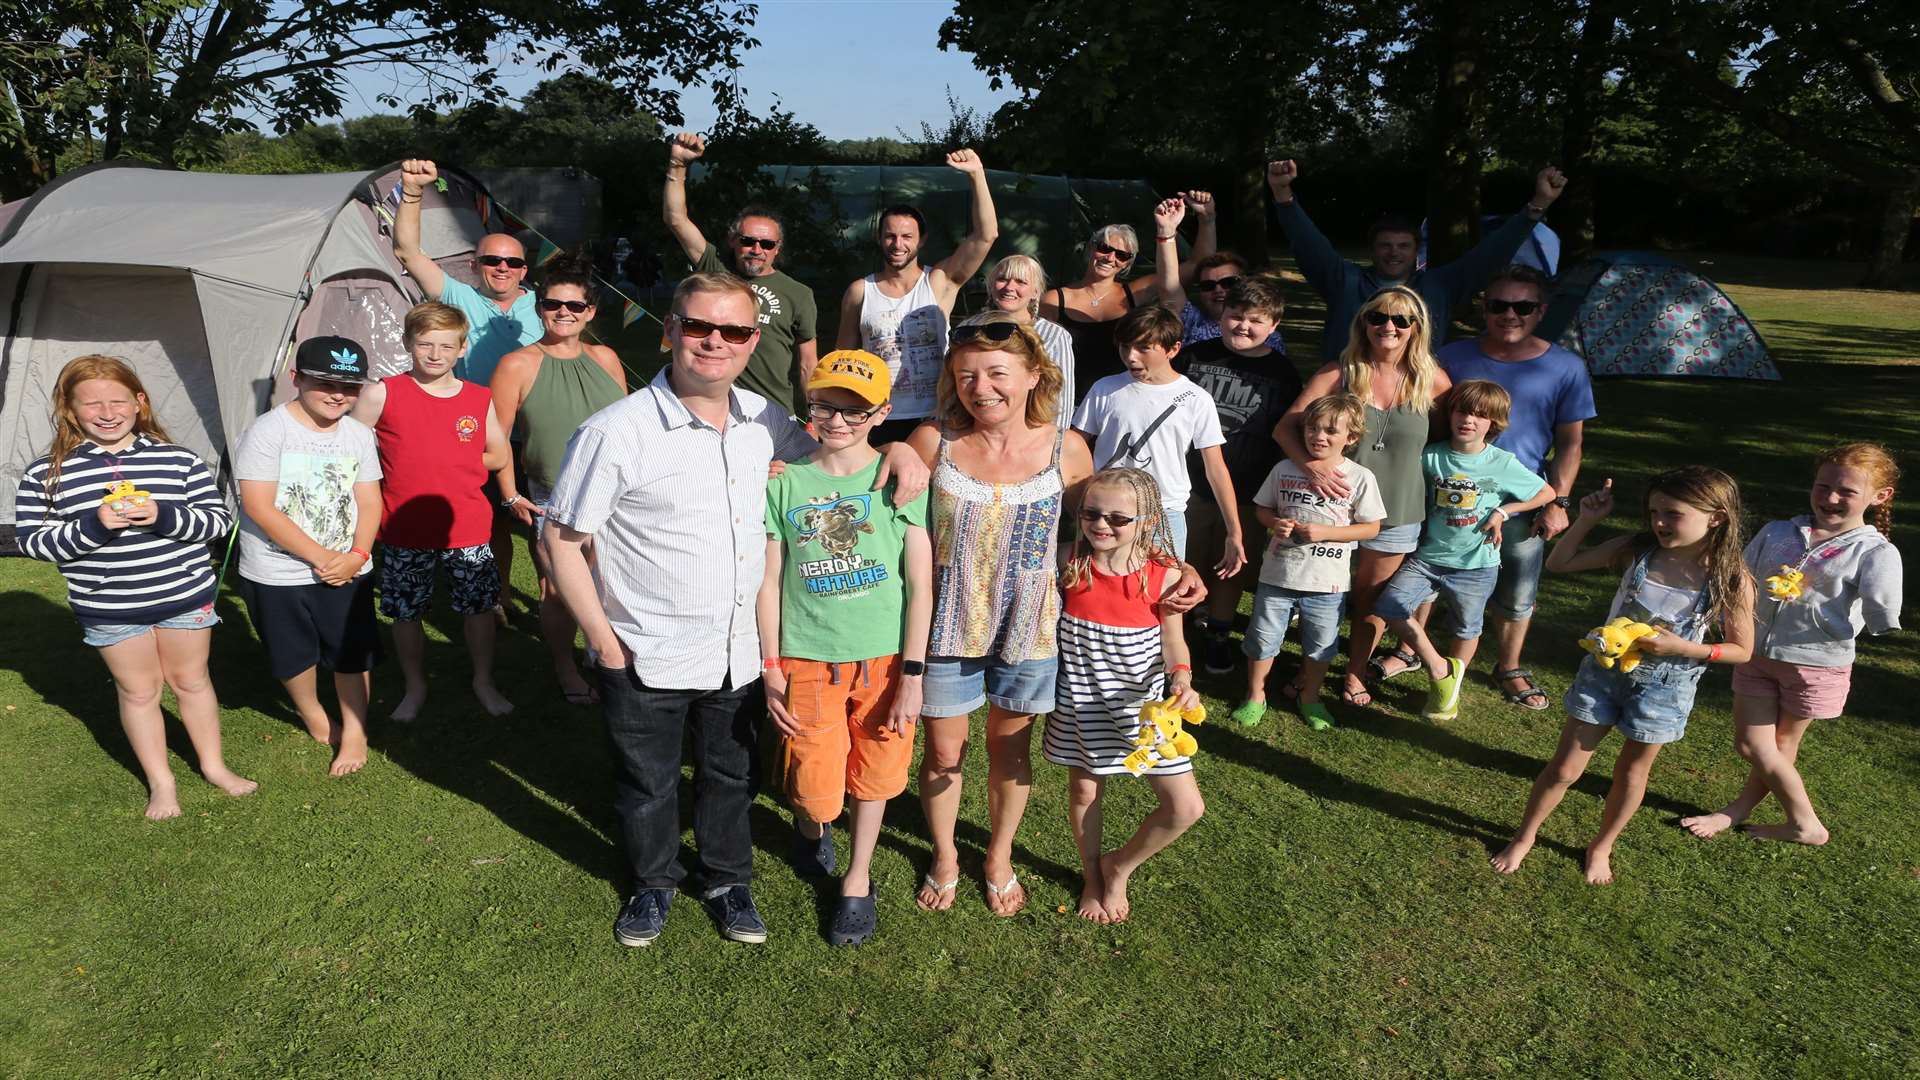 Dad Keith Abrehart, his son George, his wife Carol and their daughter, Beth, with friends and family at Campfest